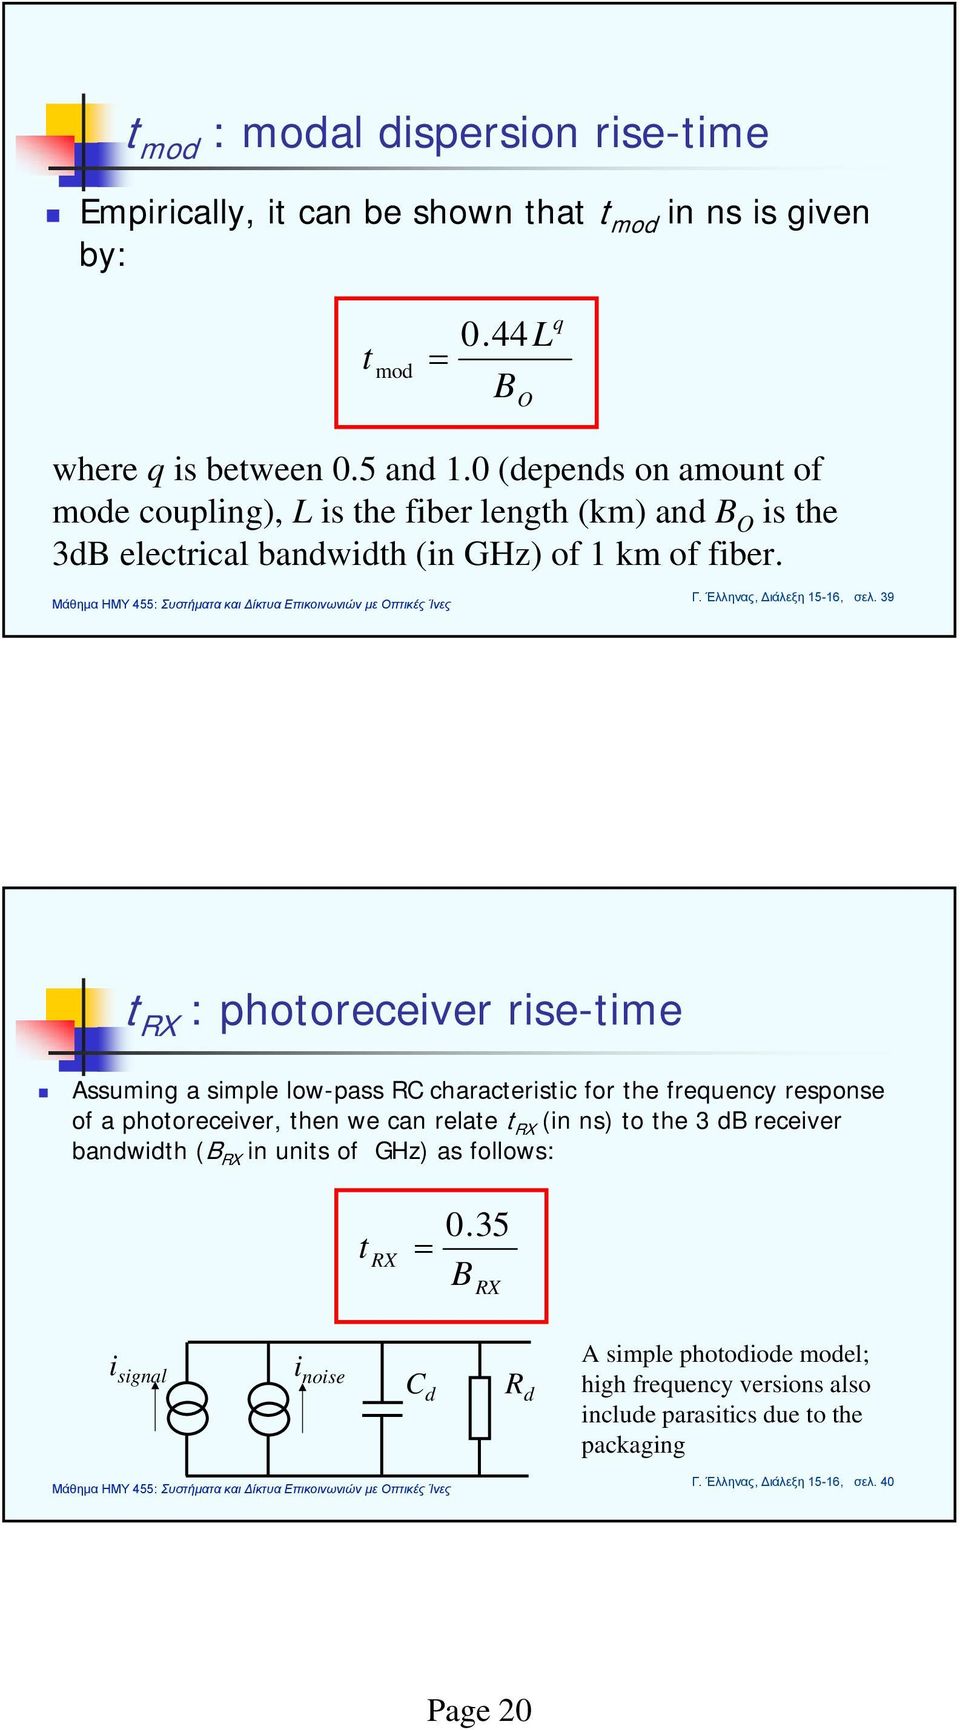 39 t RX : photoreceiver rise-time Assuming a simple low-pass RC characteristic for the frequency response of a photoreceiver, then we can relate t RX (in ns) to the 3 db receiver